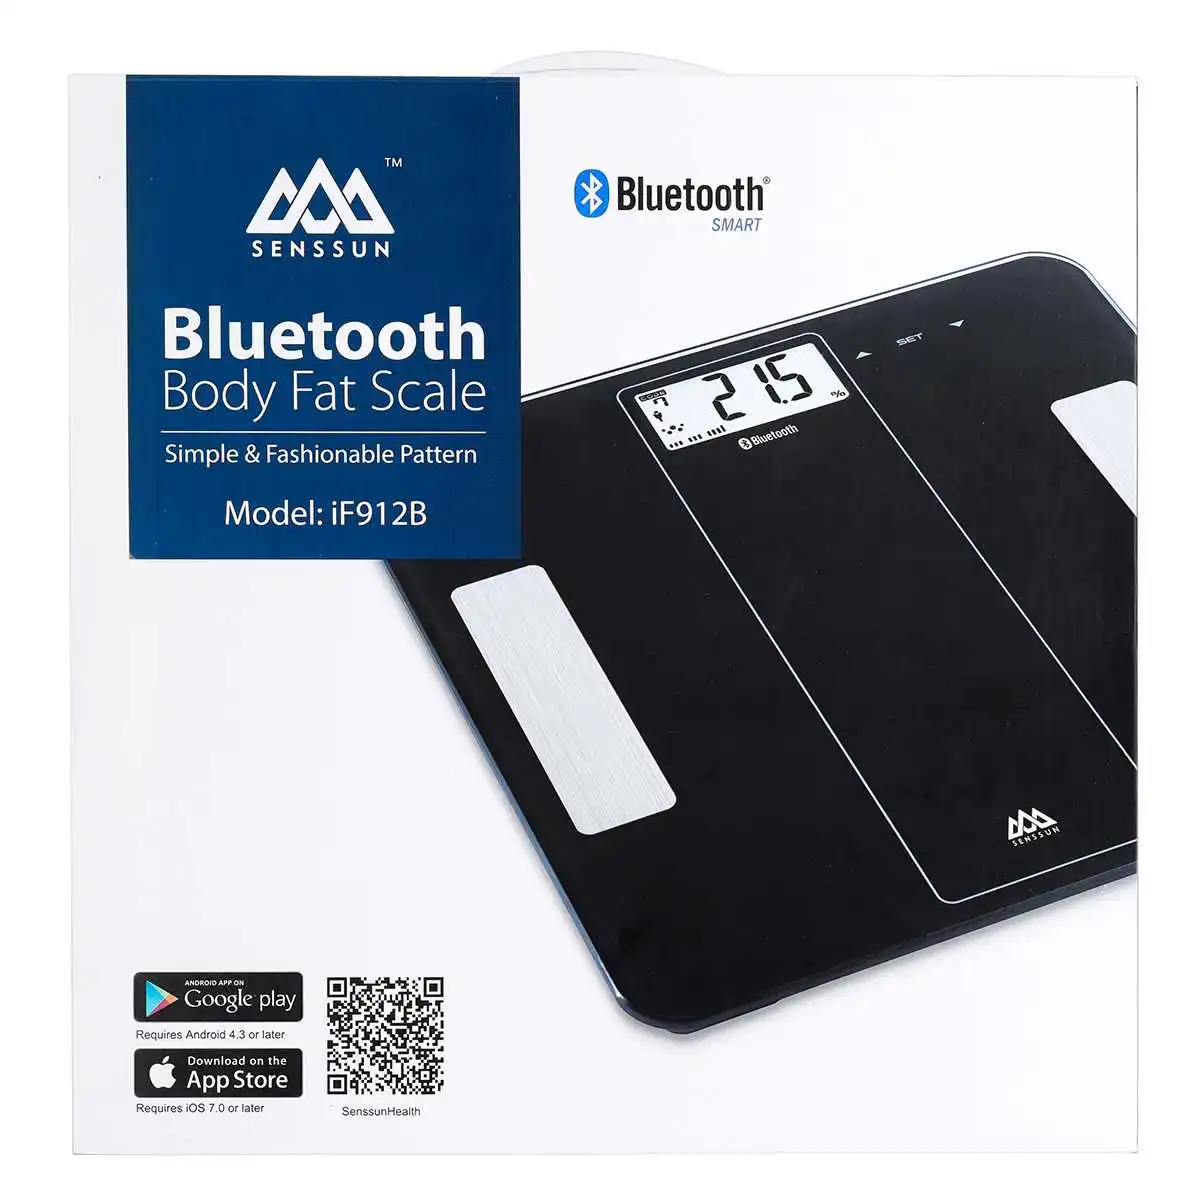 Smart Electronic Digital Bluetooth Body Fat Scales Weight Scale High  Precision ITO Technology Smart BMI Scales Analyzer|Bathroom Scales| -  AliExpress